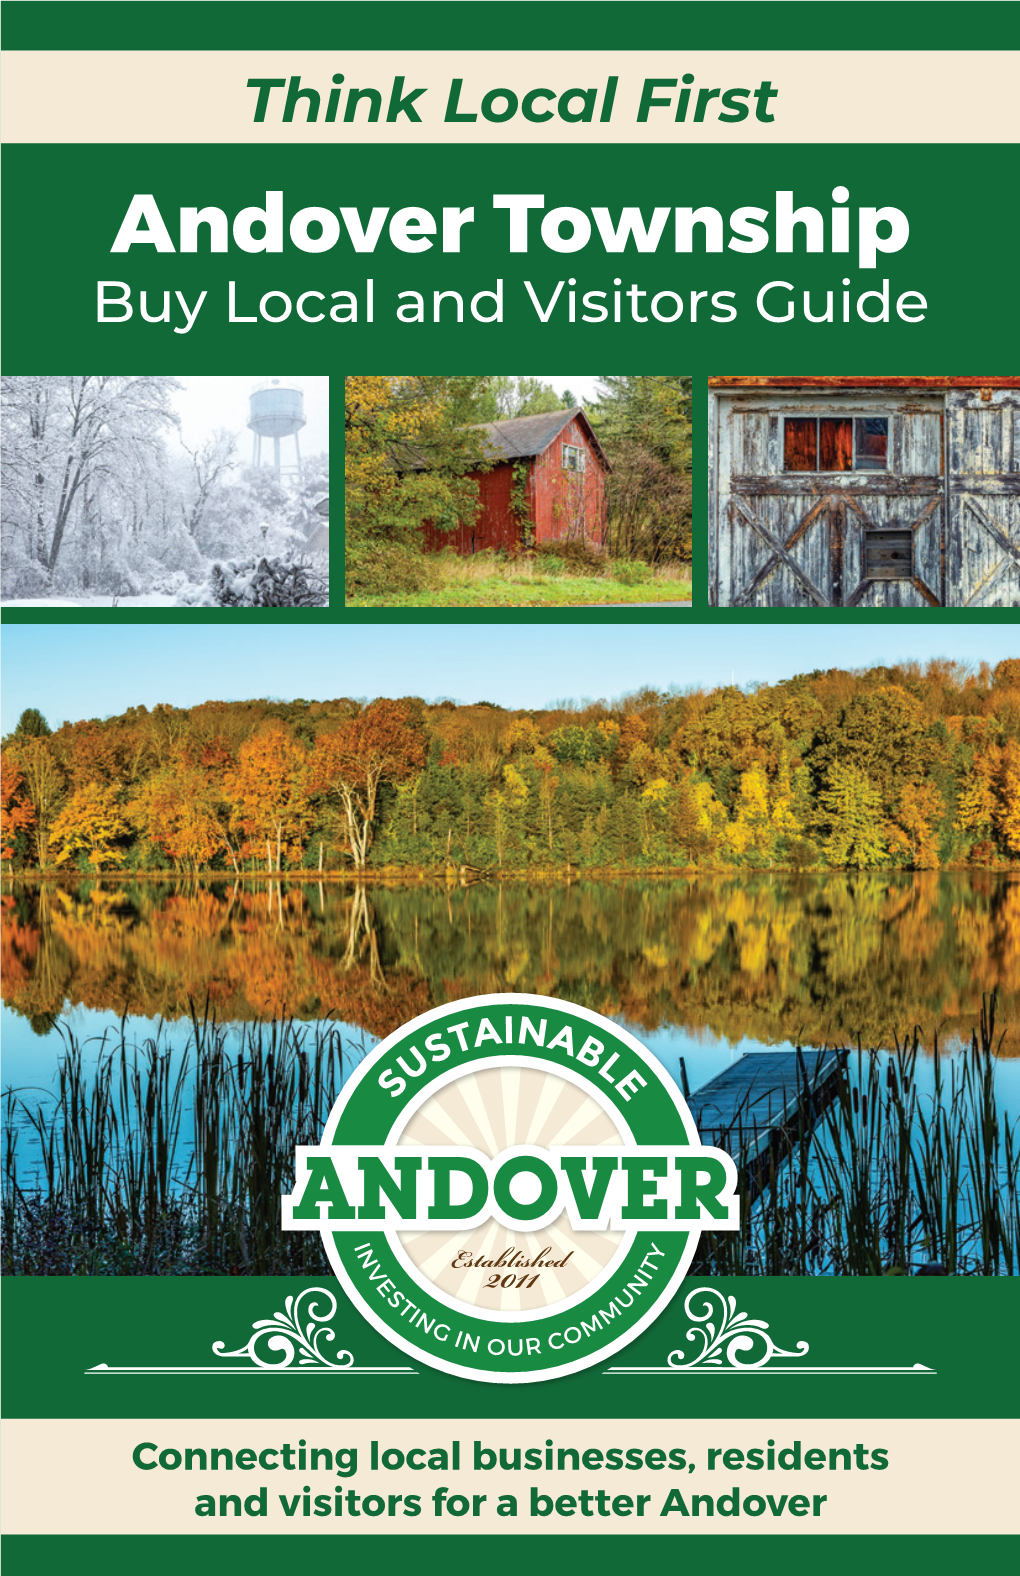 Download the Andover Township Buy Local and Visitors Guide